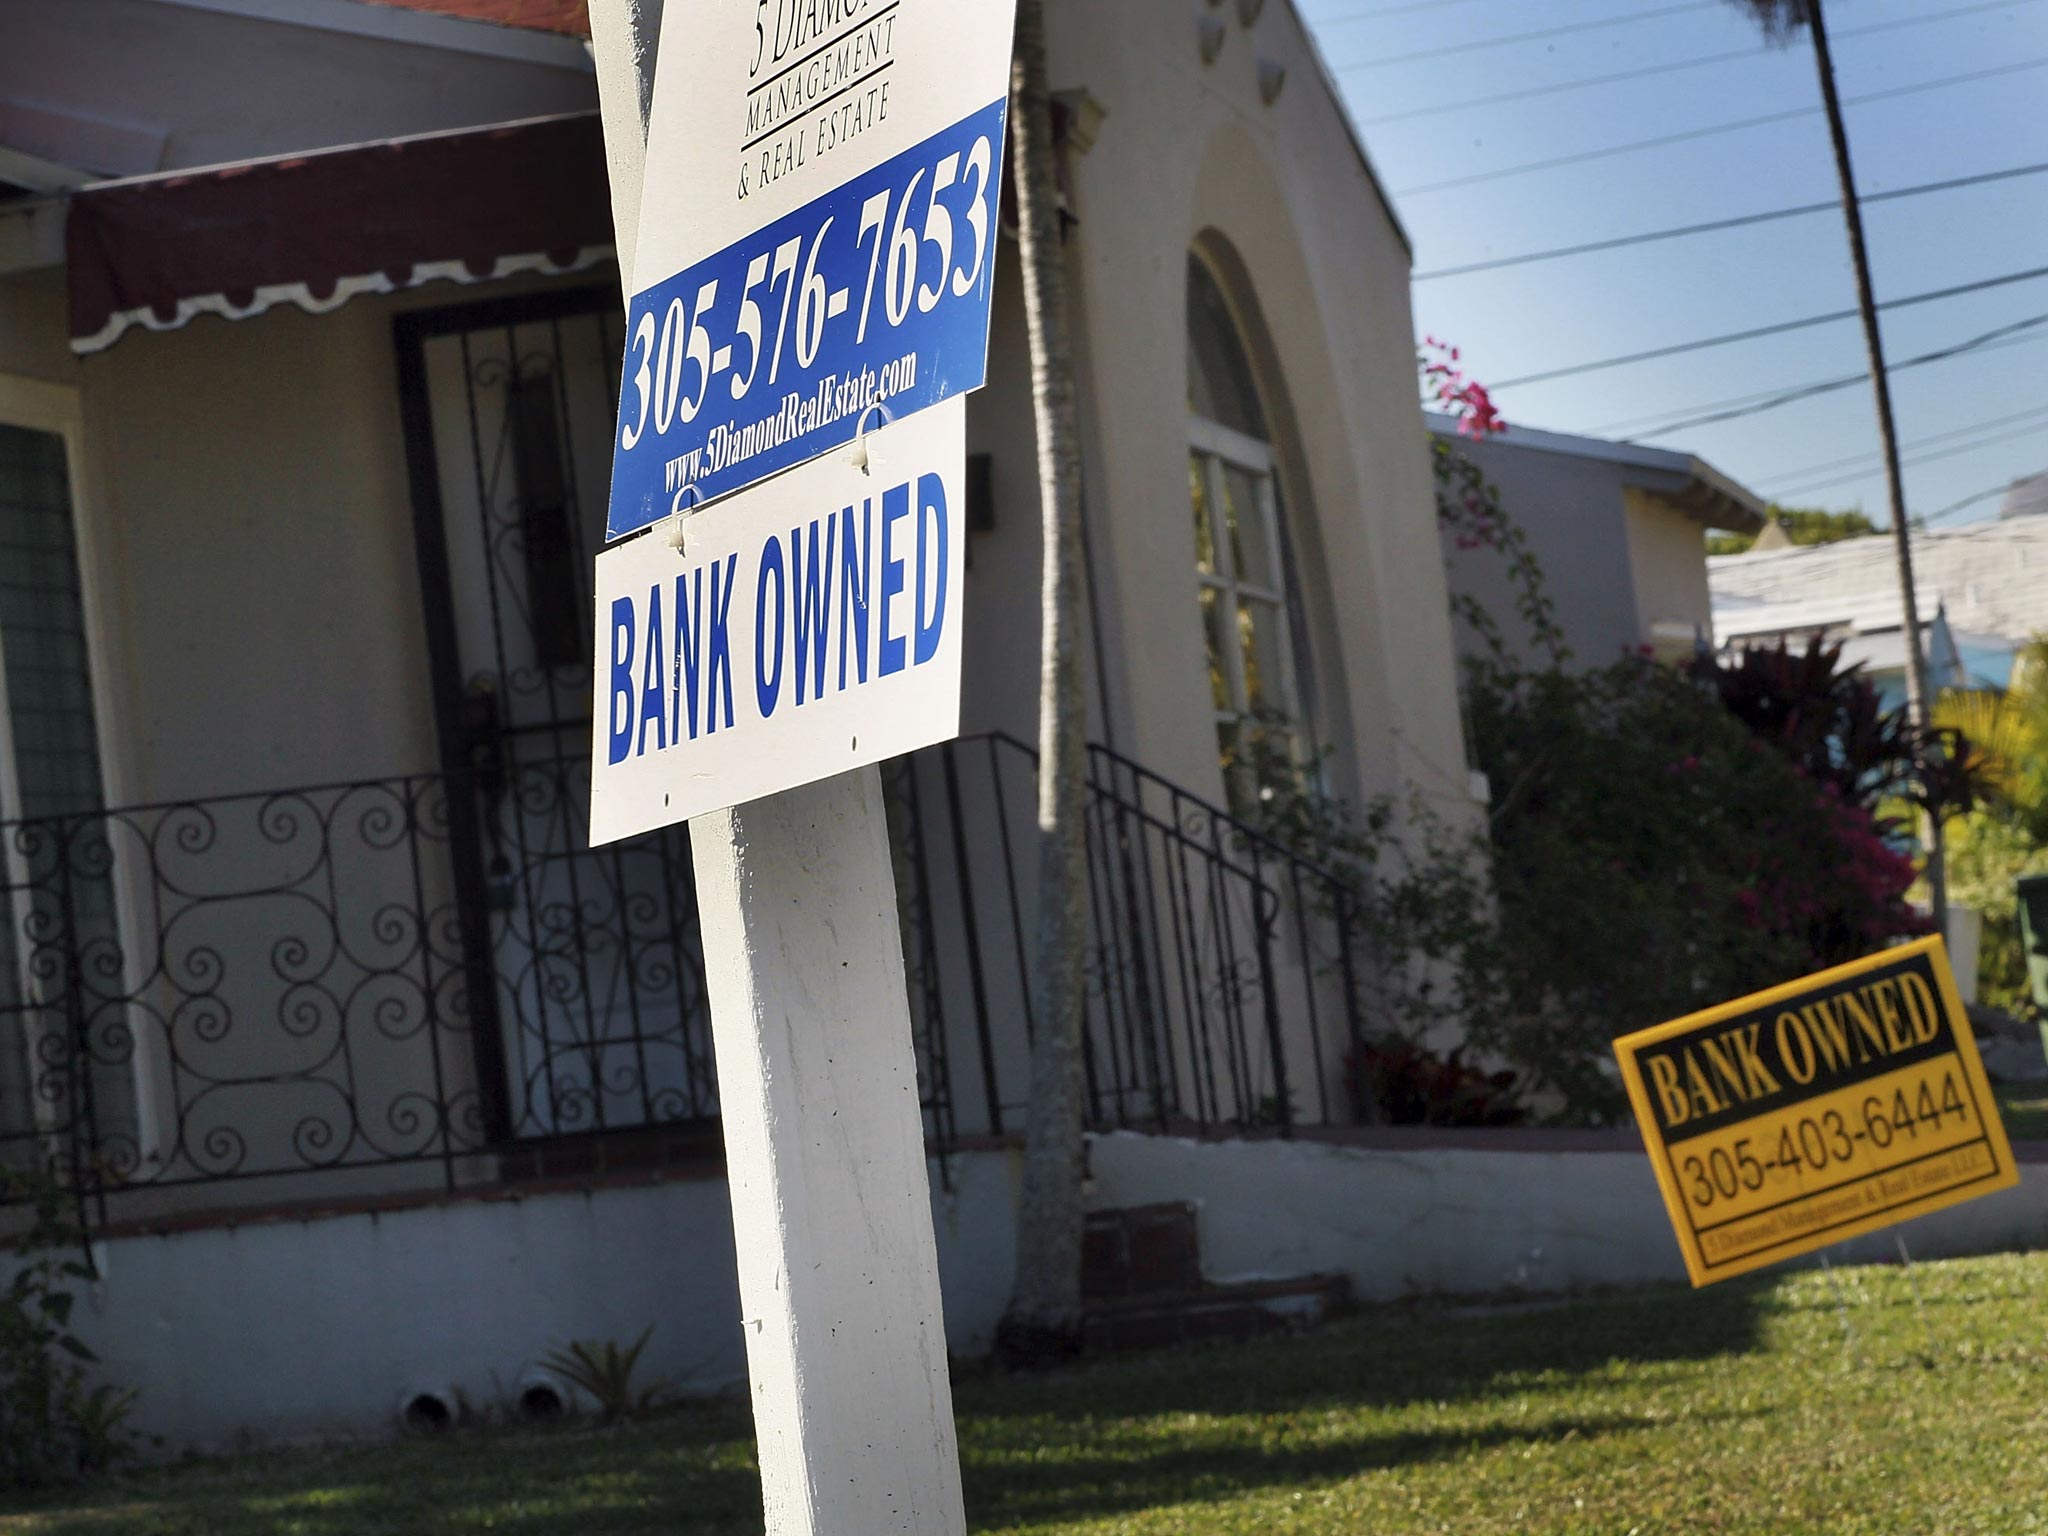 &#13;
America’s subprime mortgage crisis has been blamed for driving the recession (Getty) &#13;